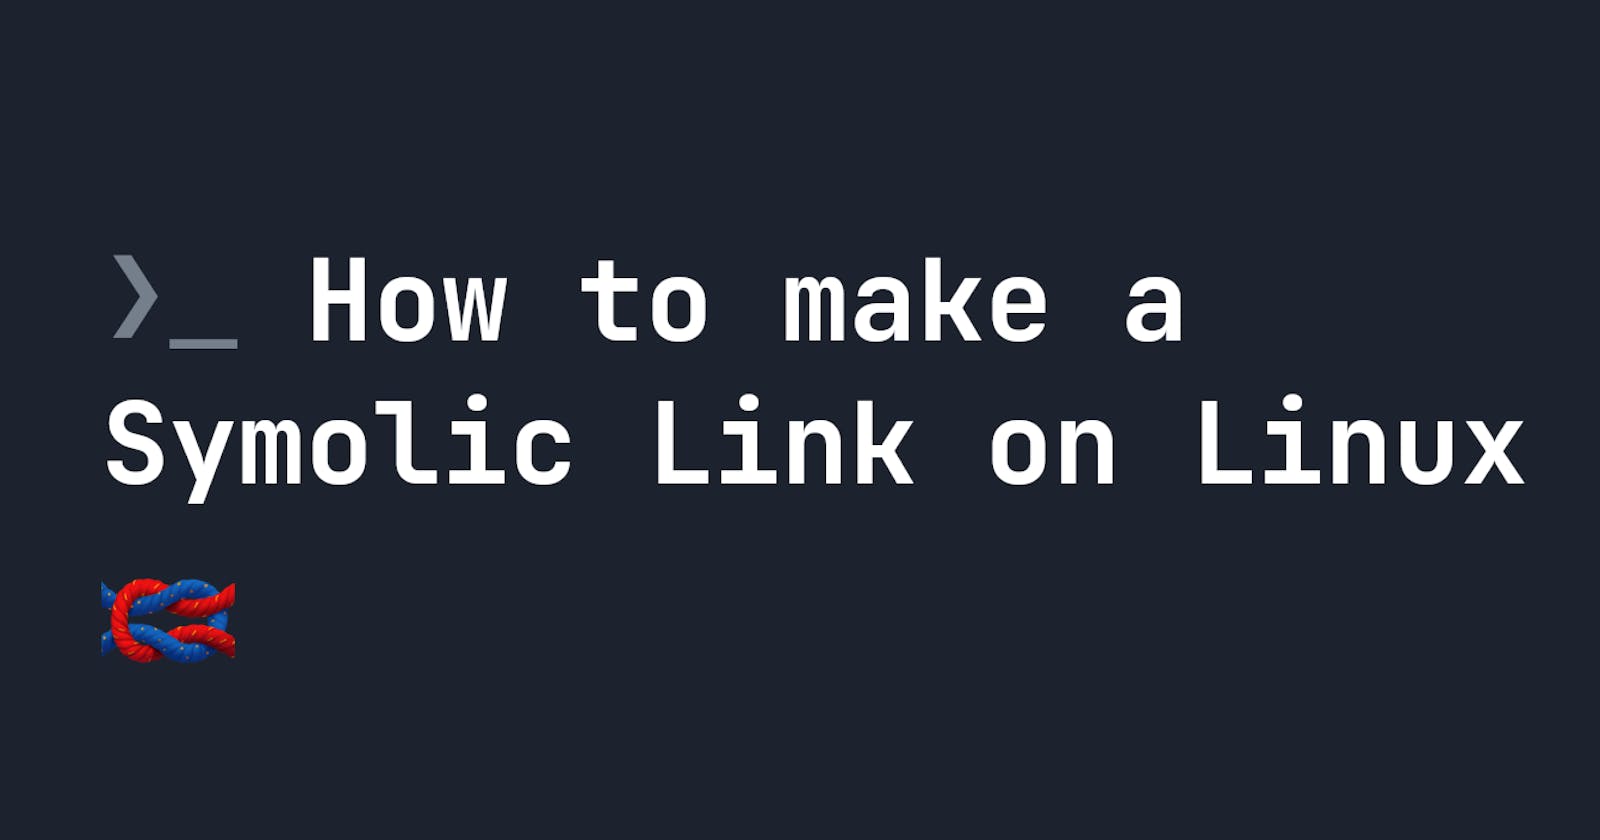 How to make a Symbolic Link on Linux